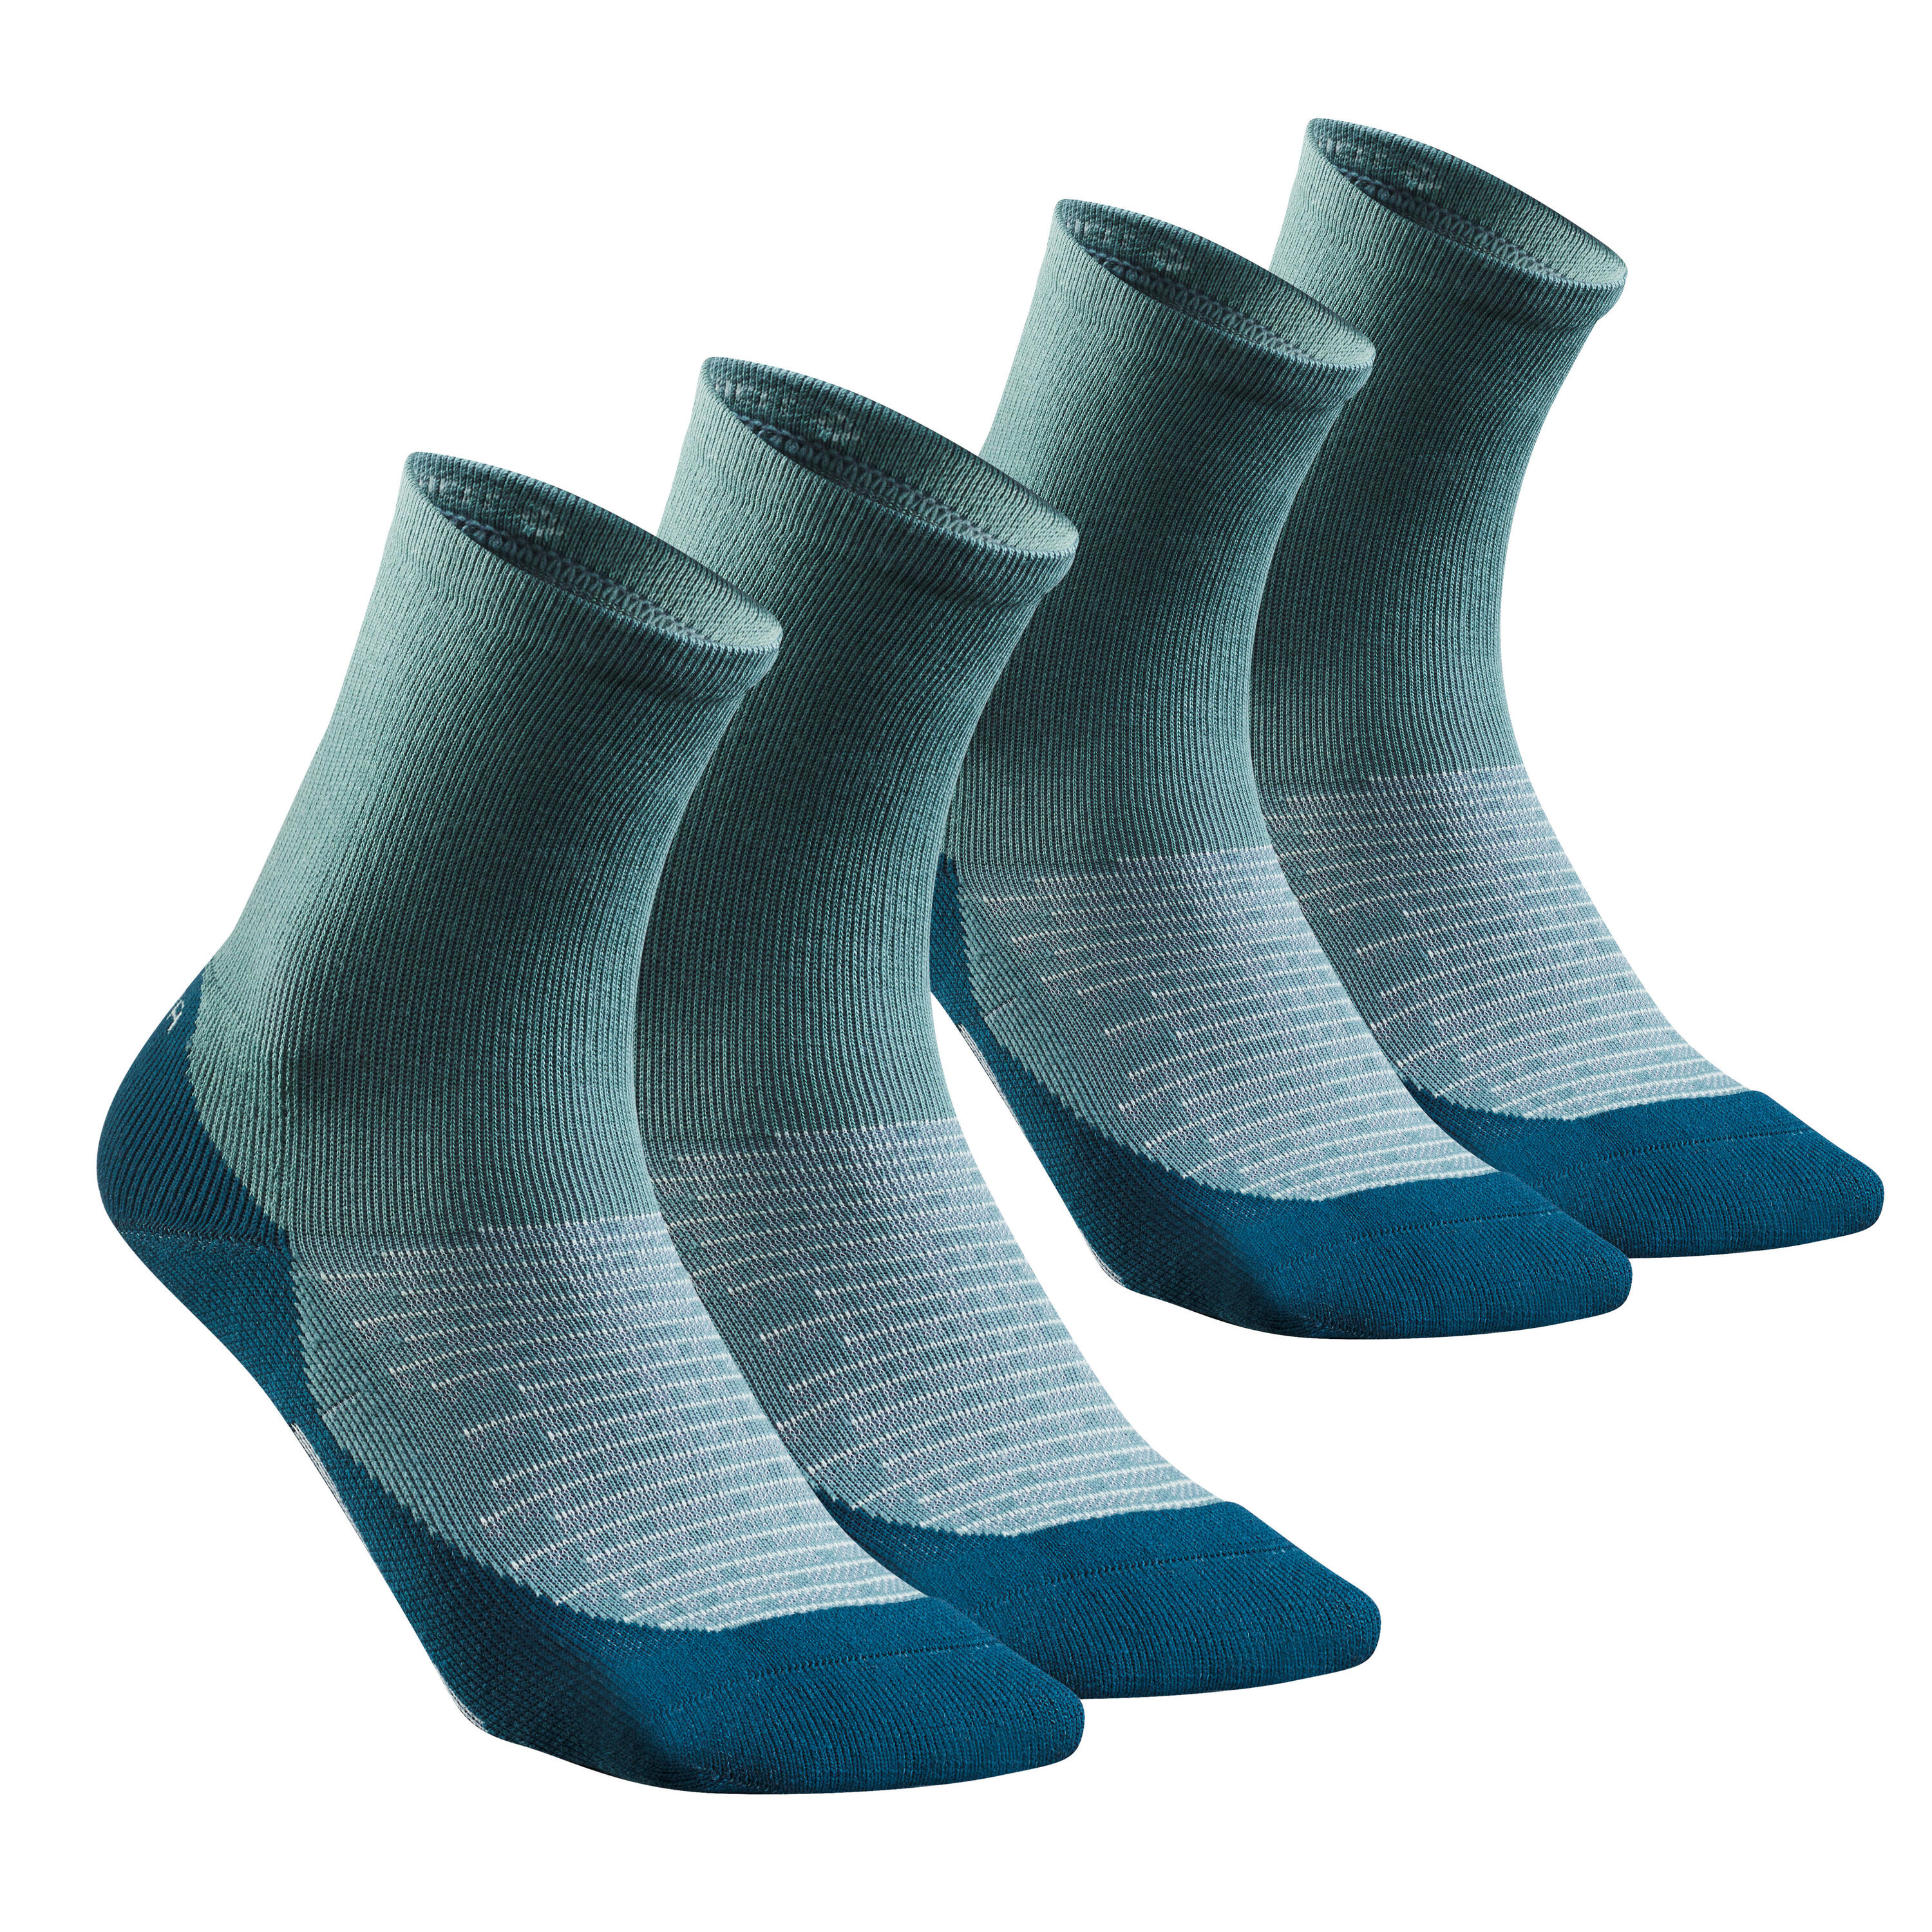 QUECHUA Sock Hike 100 High  - Pack of 2 pairs - Turquoise